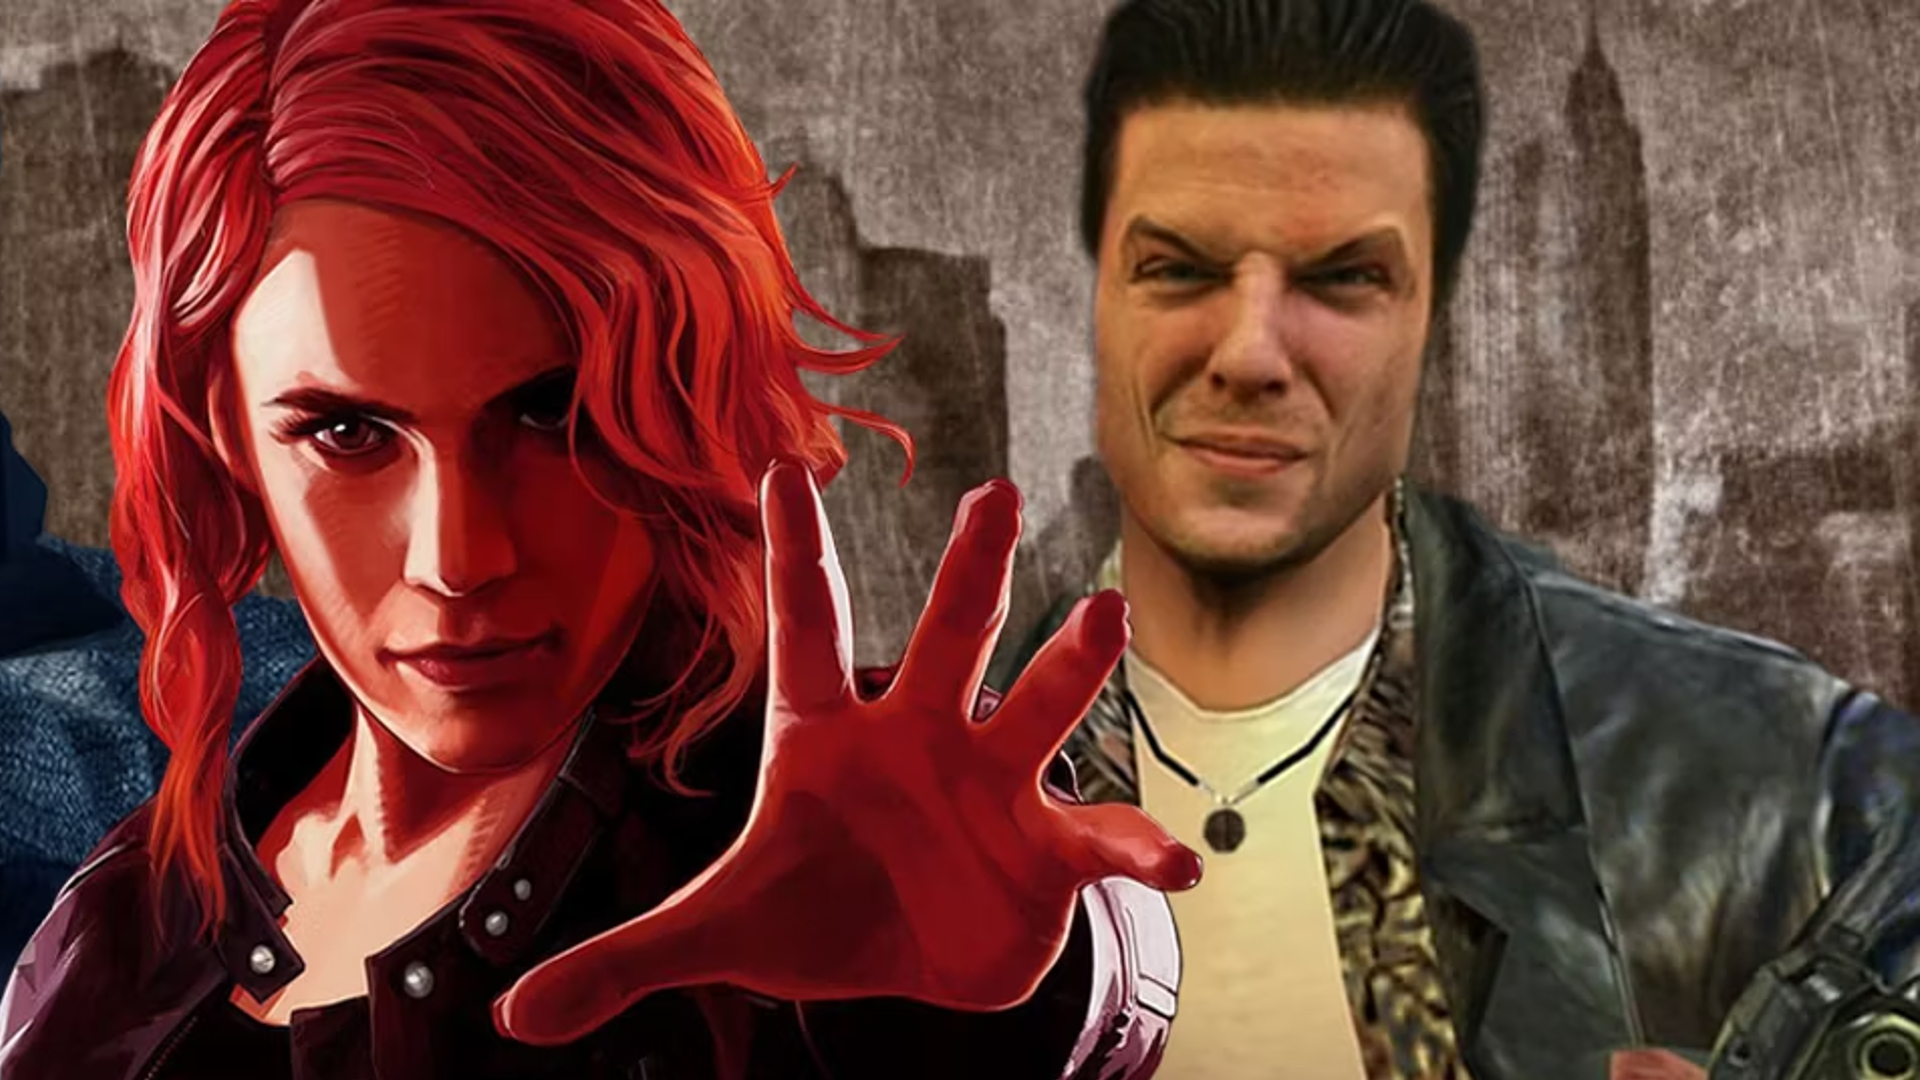 Remedy Says Control Multiplayer Game and Max Payne Remakes Have Progressed  to Production Stage